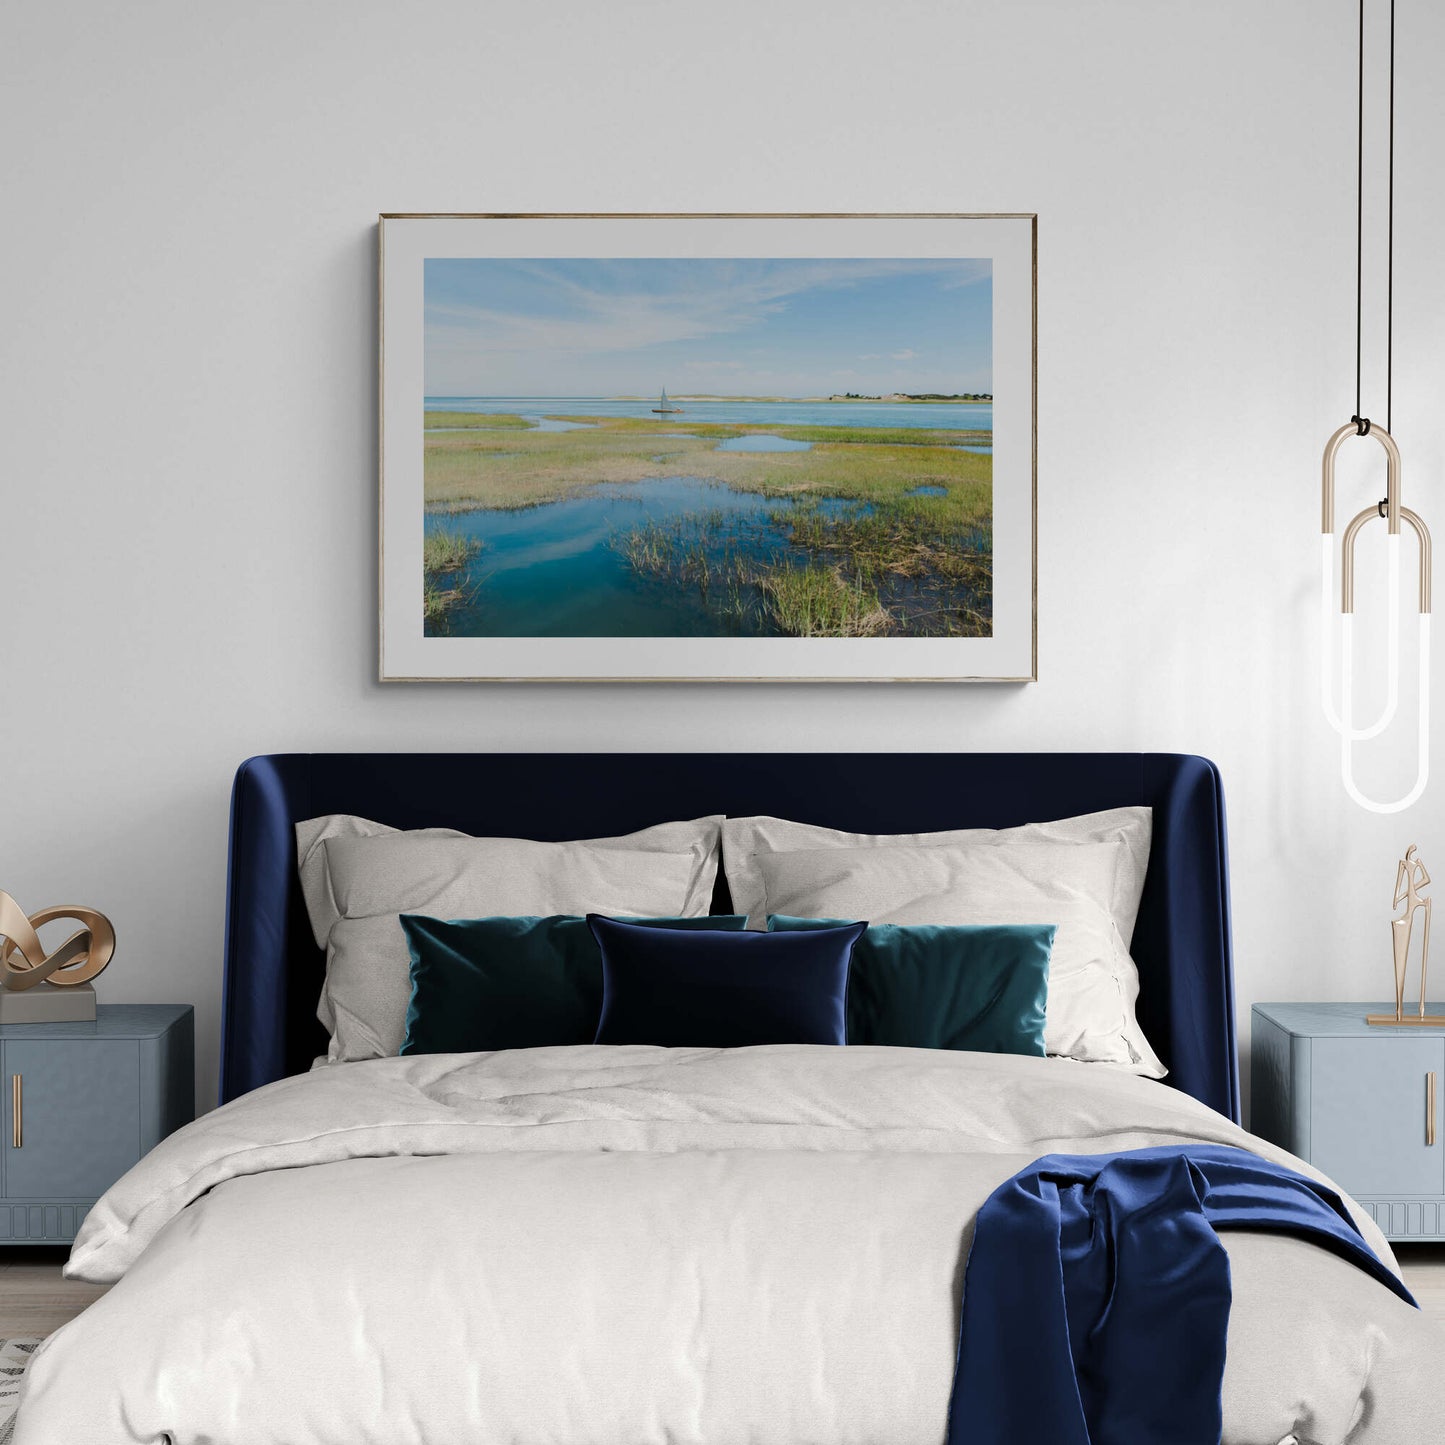 Cape Cod Sailboat Photograph as Wall Art in a bedroom